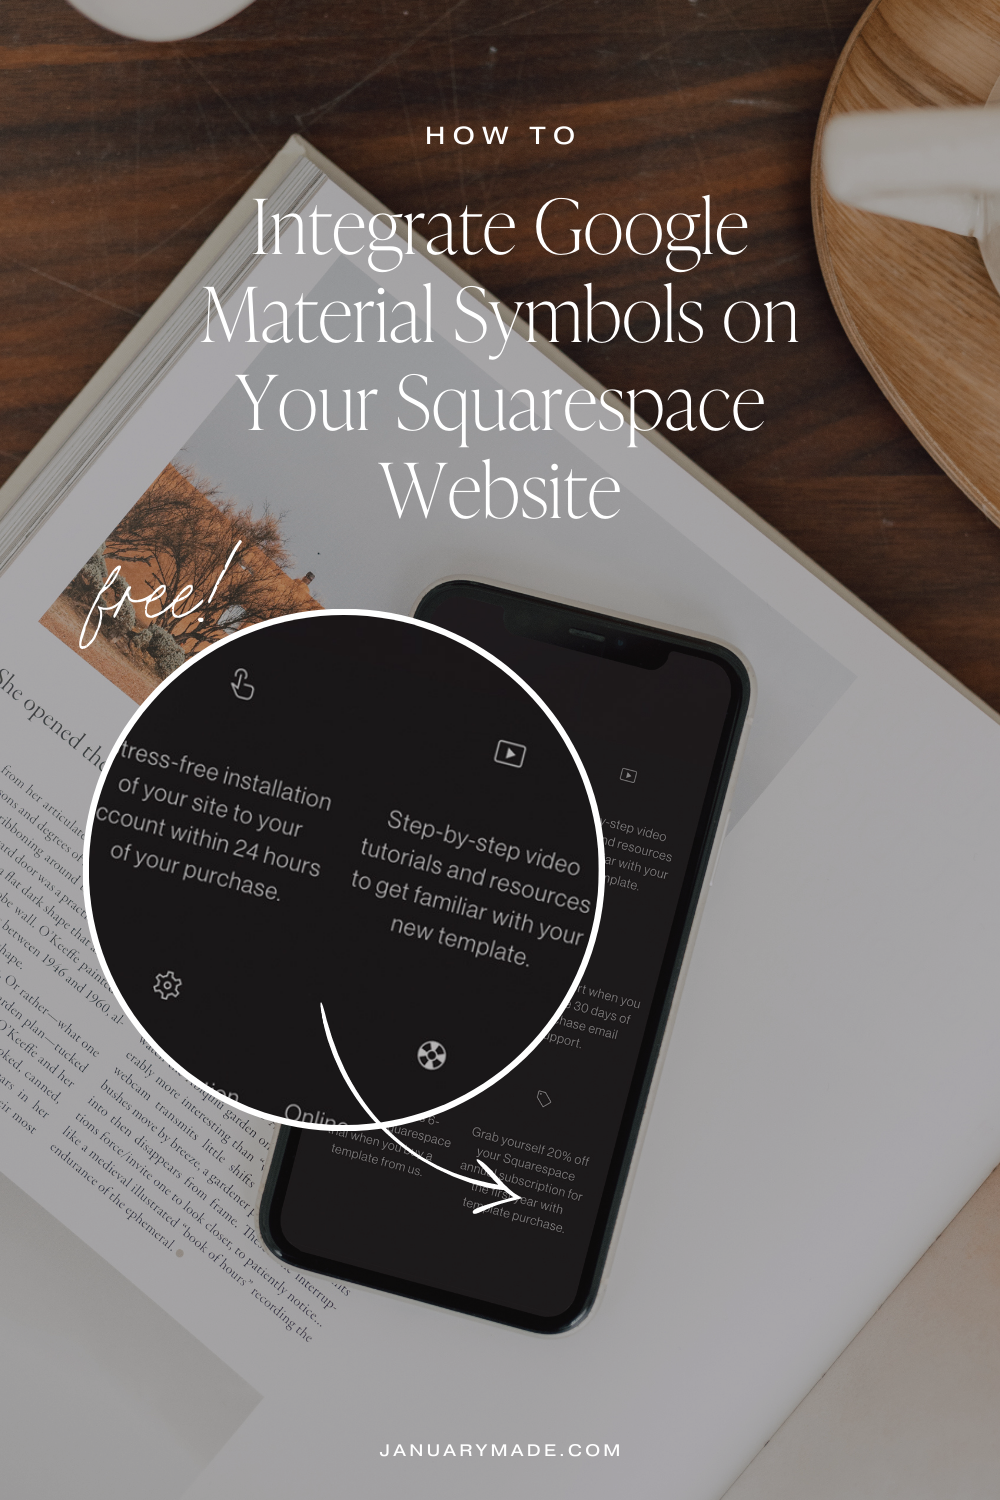 Integrate Google Material Symbols on Your Squarespace Website